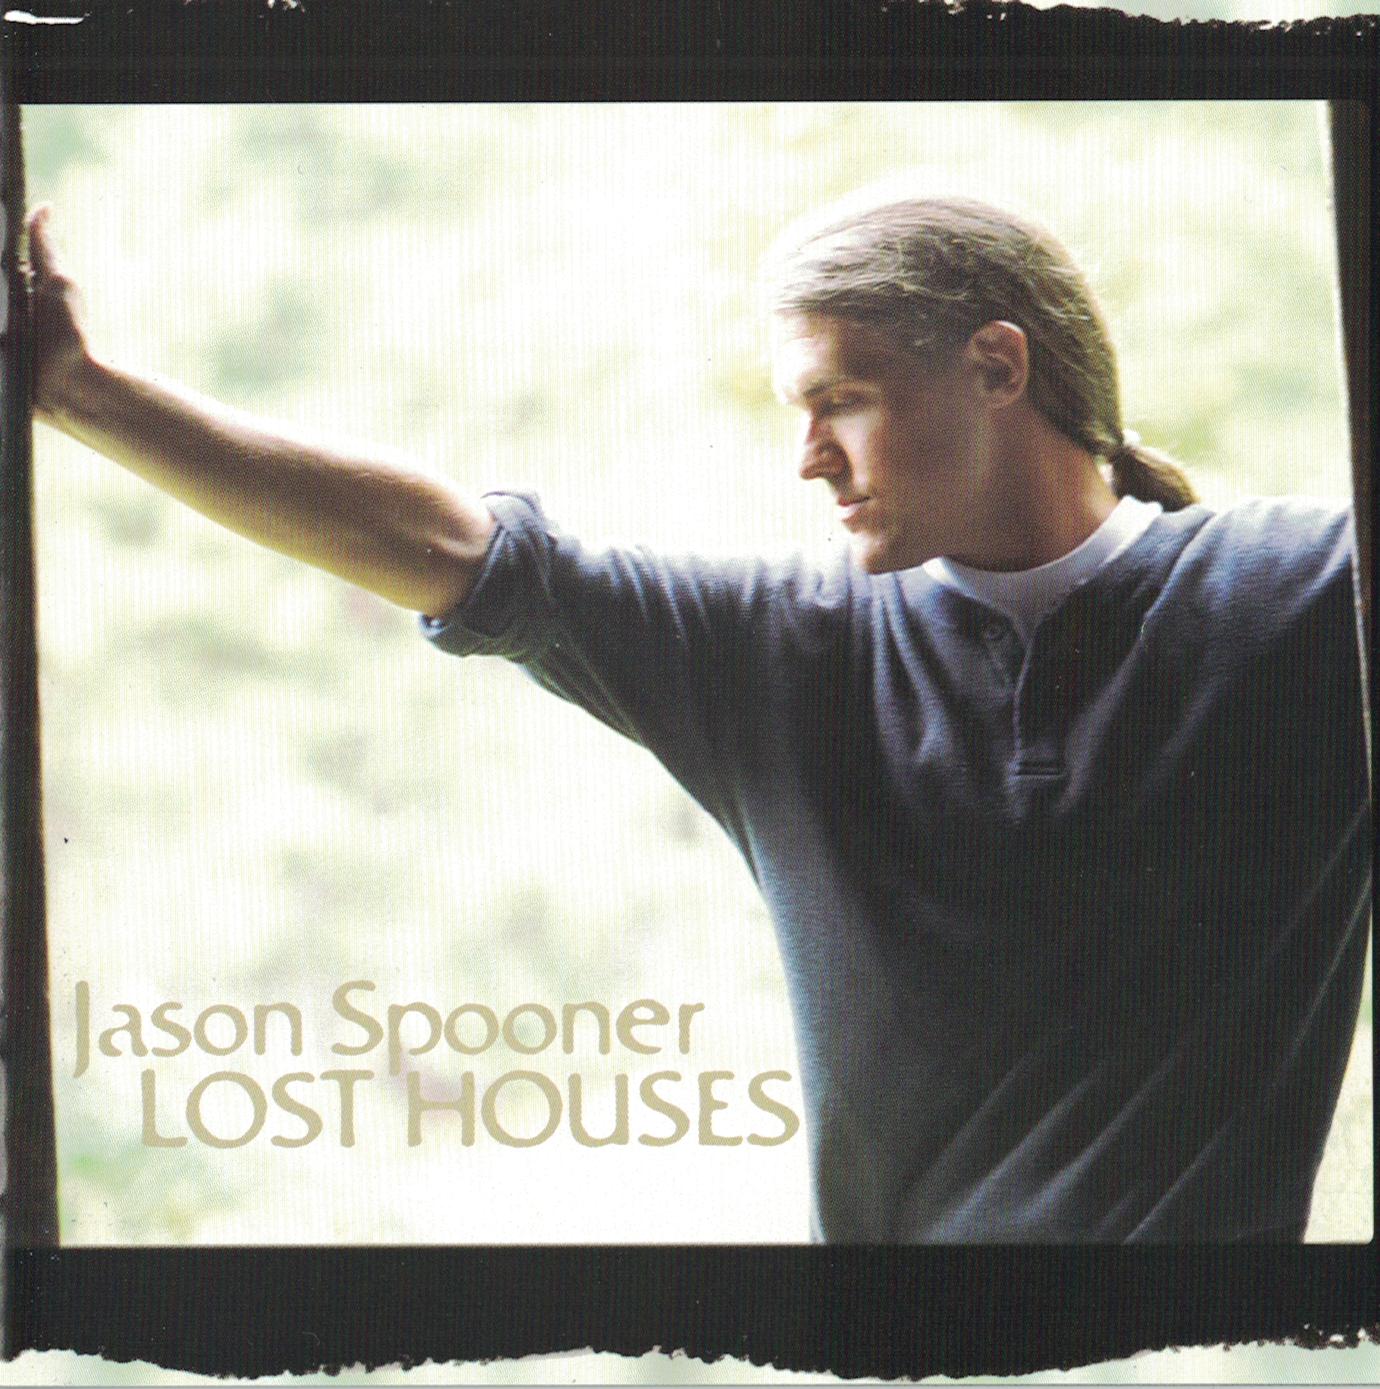 Jason Spooner - Lost Houses - cover art and links to song lyrics